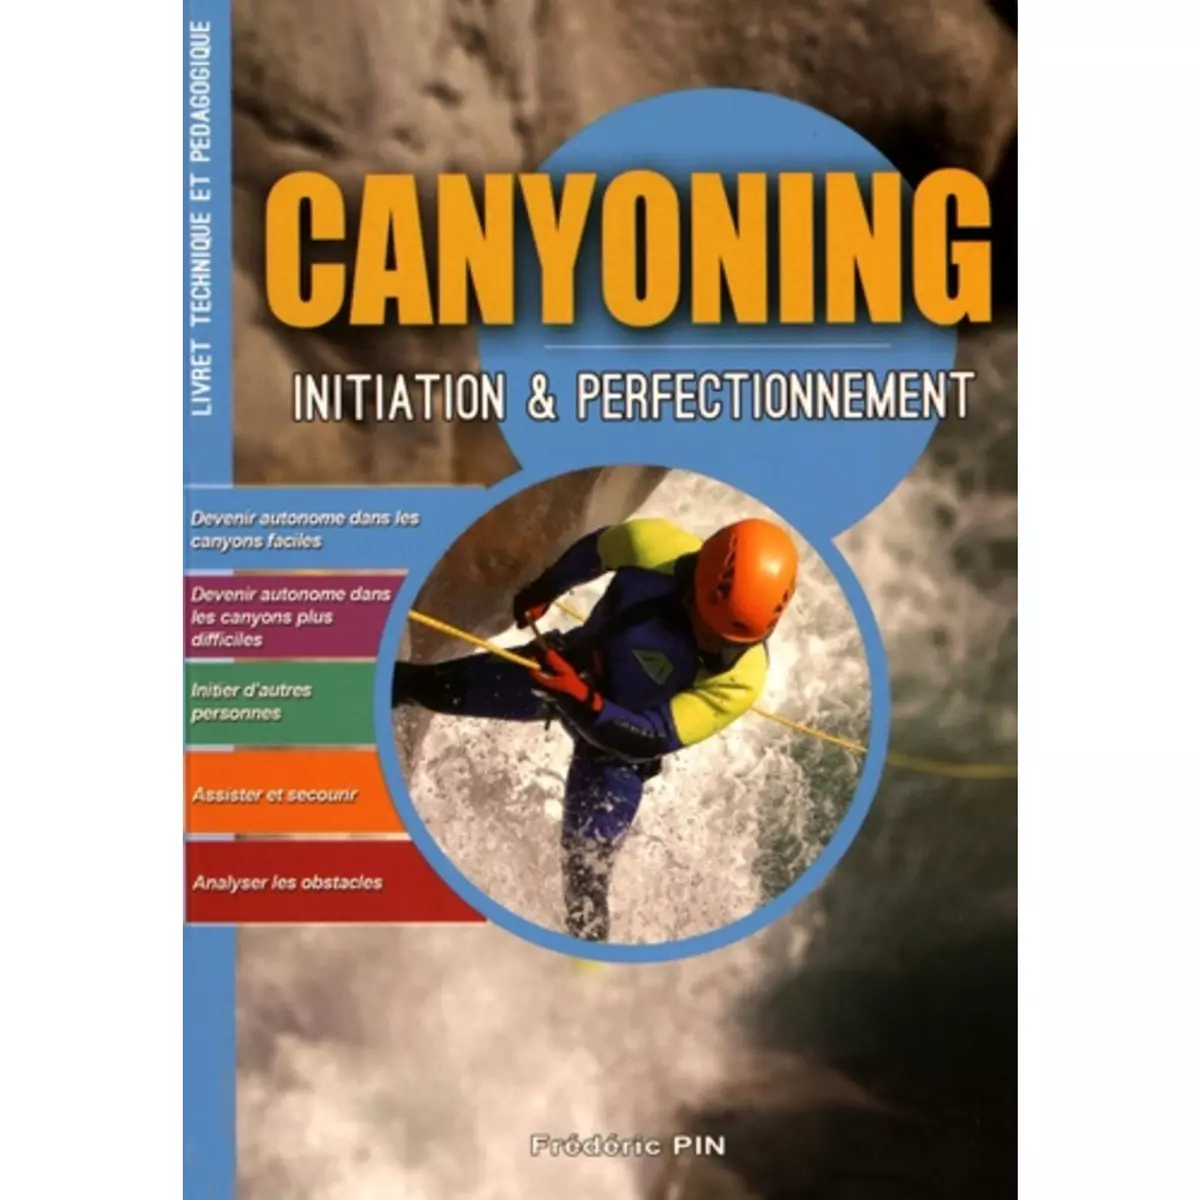  CANYONING : INITIATION & PERFECTIONNEMENT, Pin Frédéric